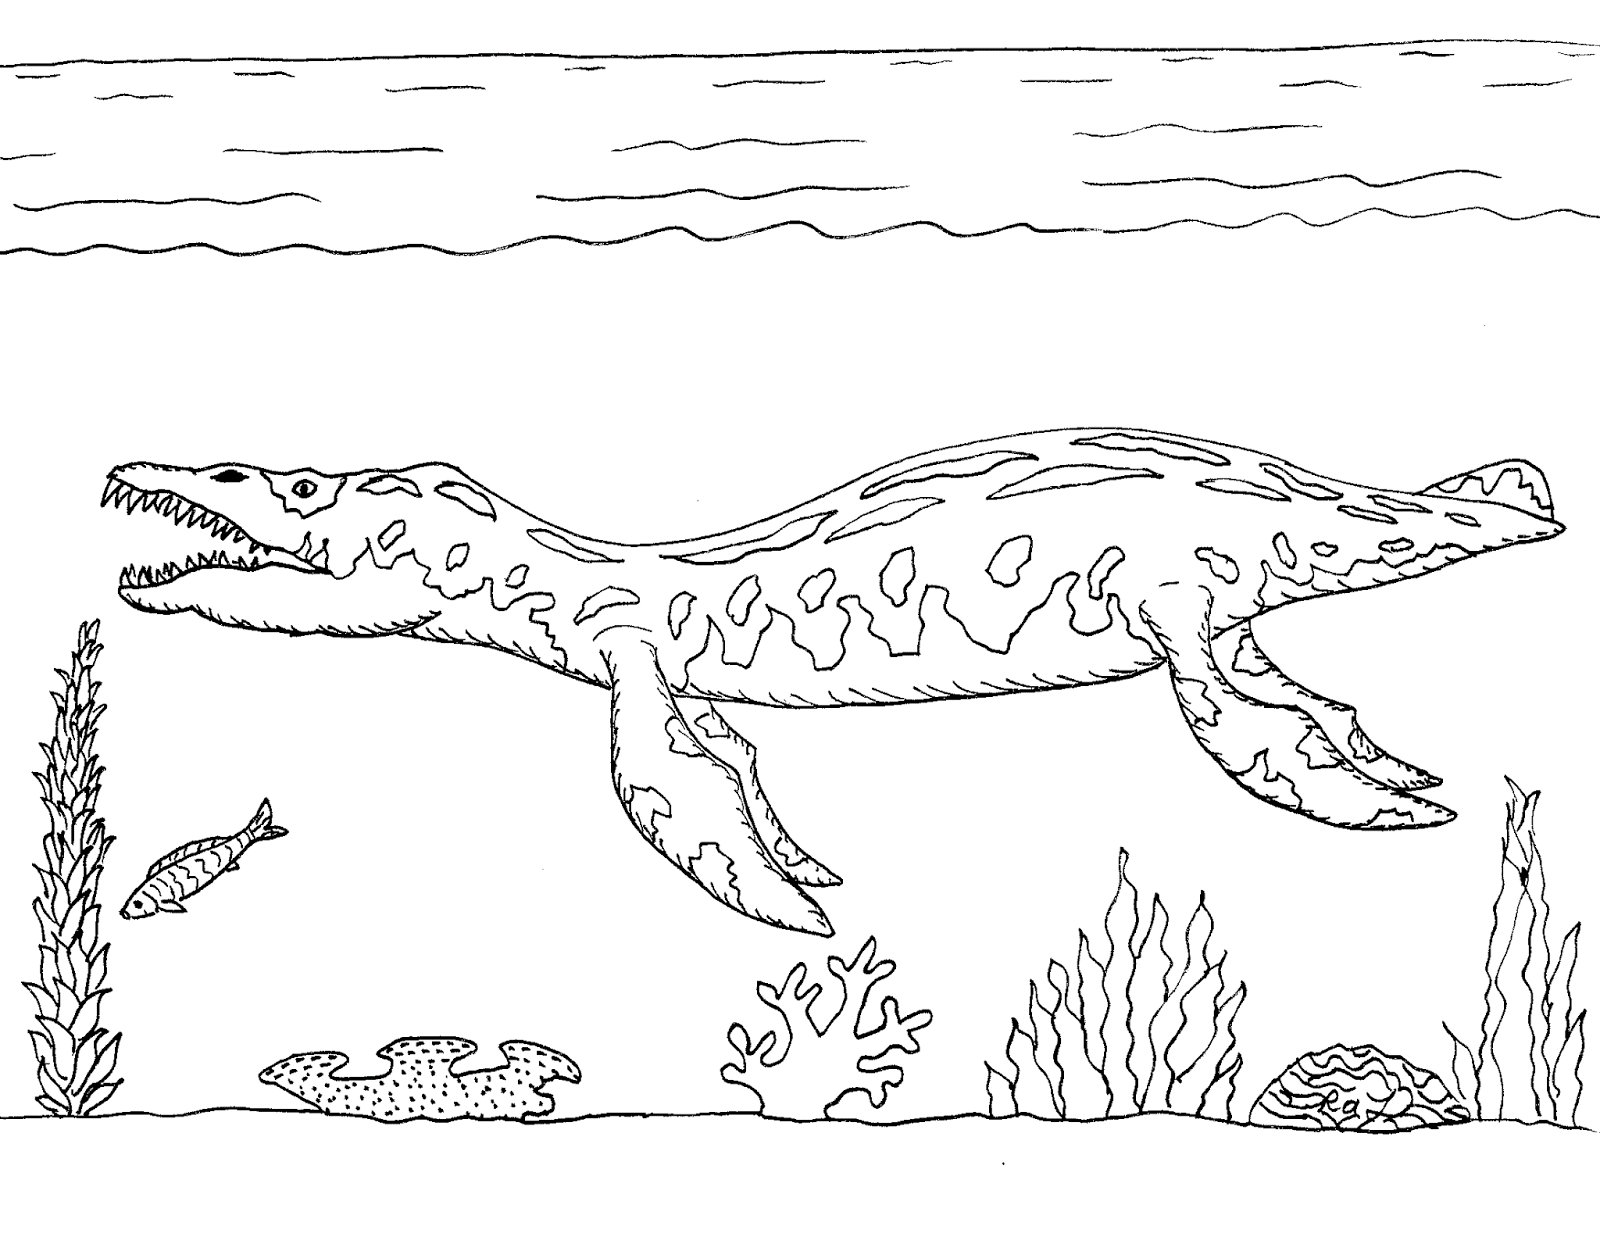 Download Robin's Great Coloring Pages: Marine Reptiles